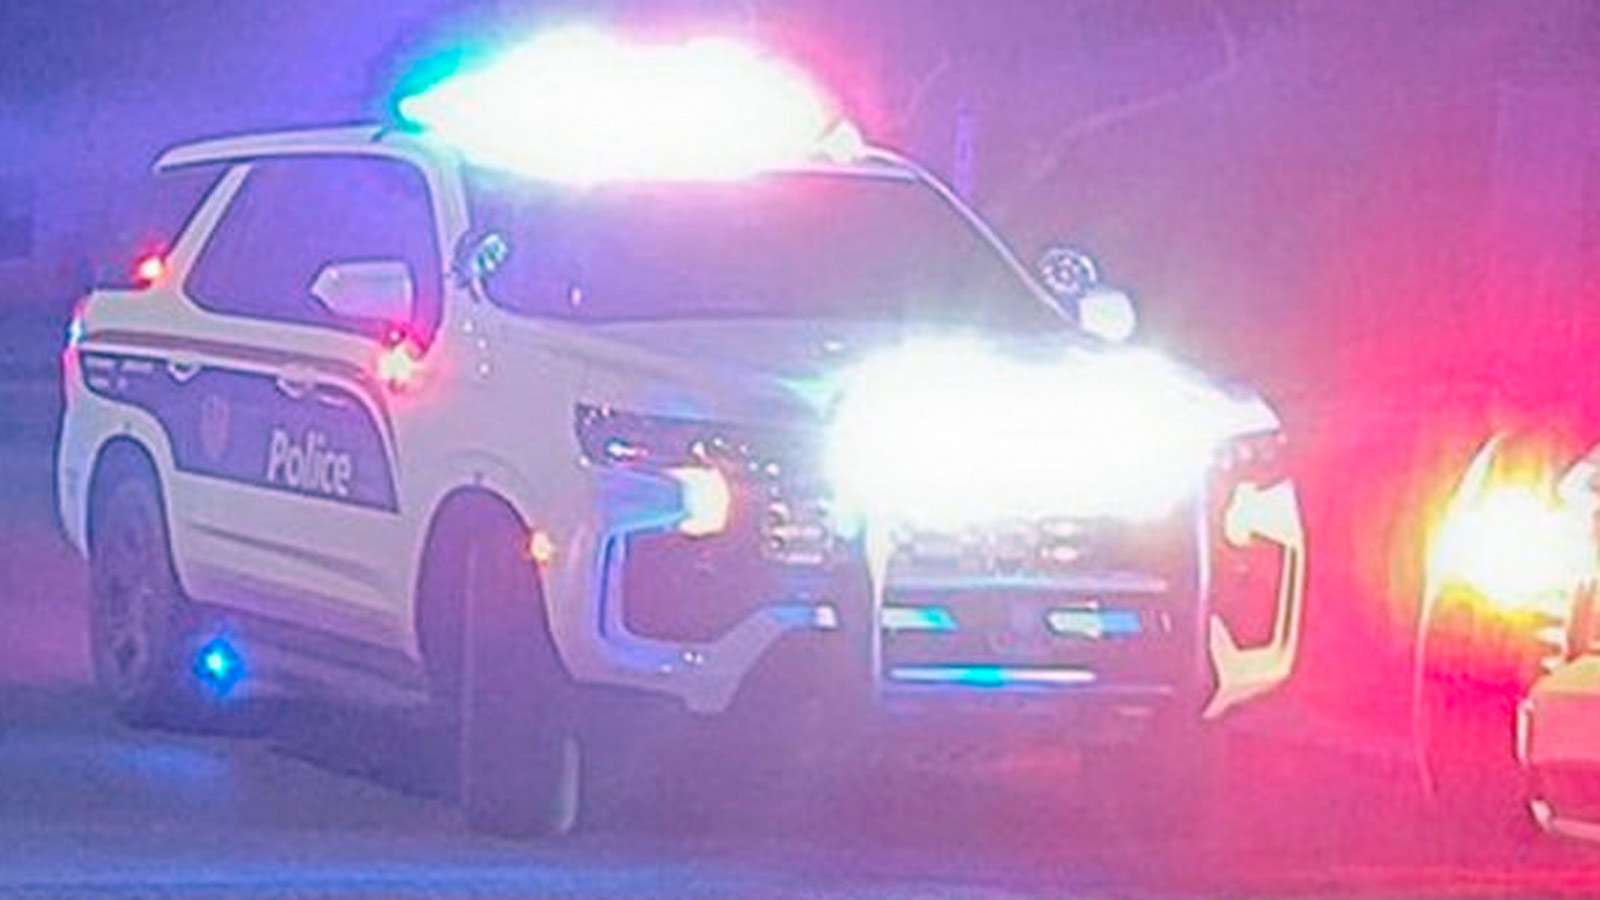 File photo of Phoenix Police cruiser with lights on at night...